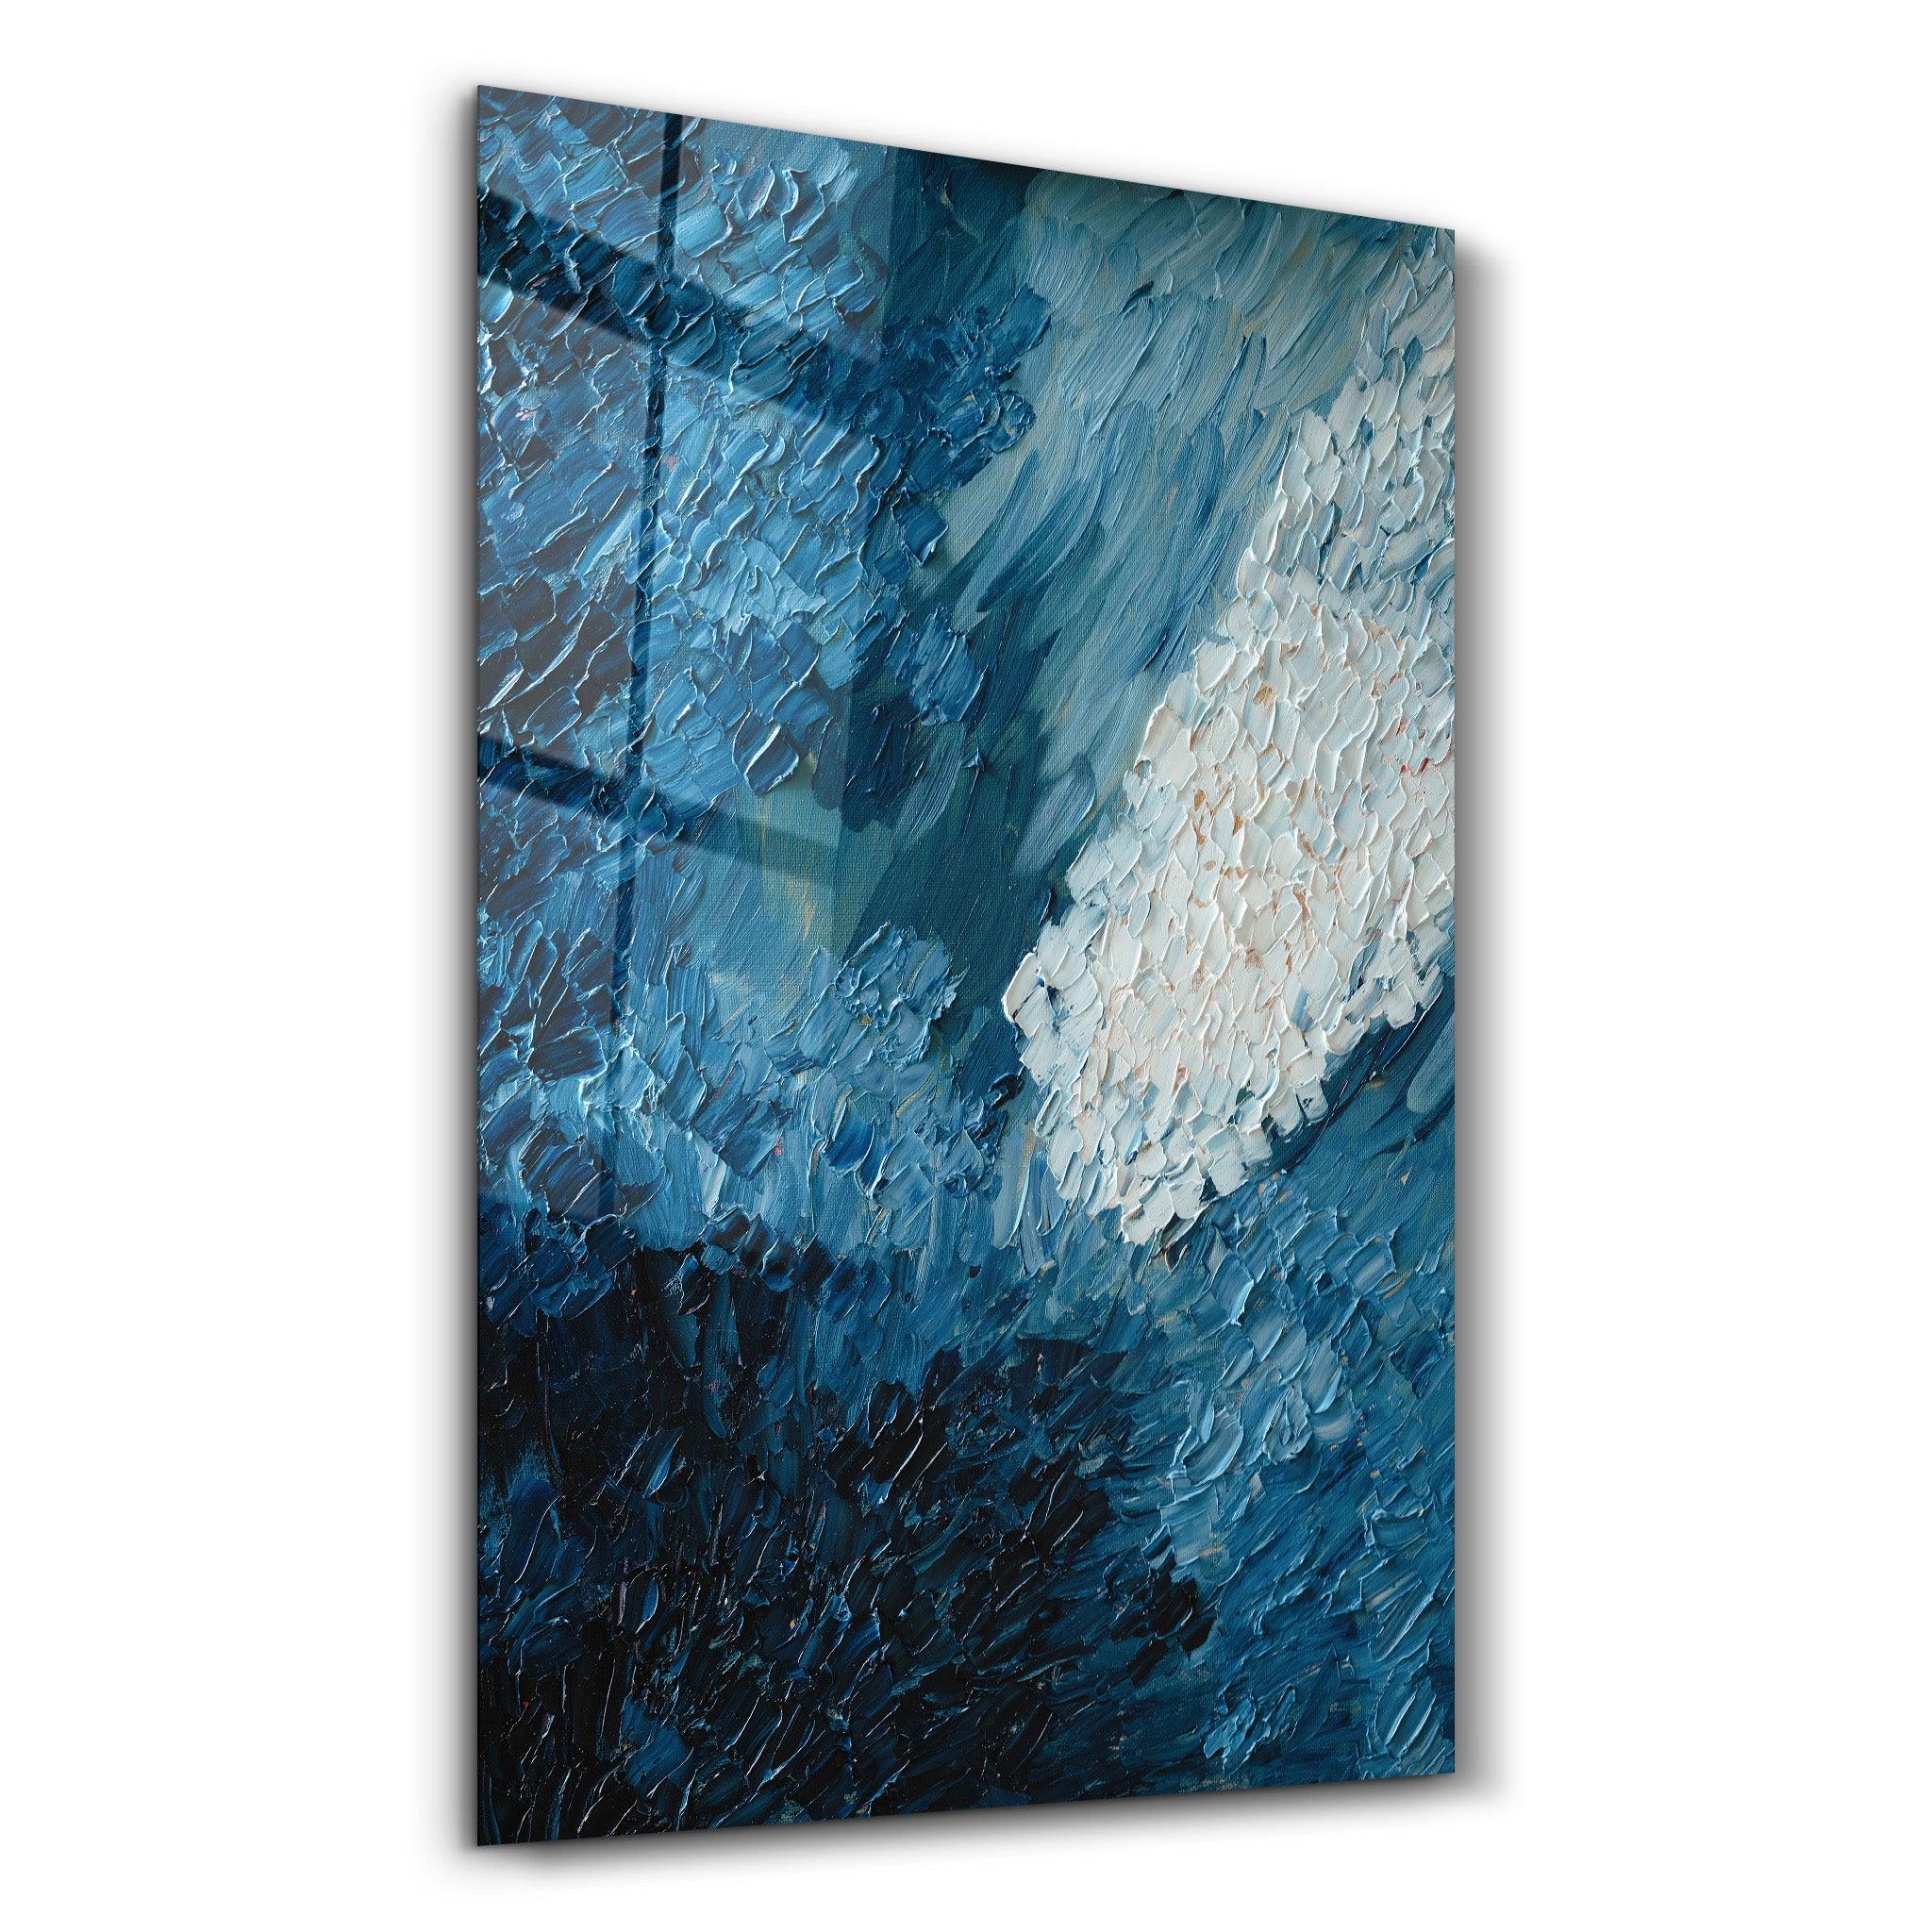 Blue Oil Painting - Abstract | Designer's Collection Glass Wall Art - ArtDesigna Glass Printing Wall Art